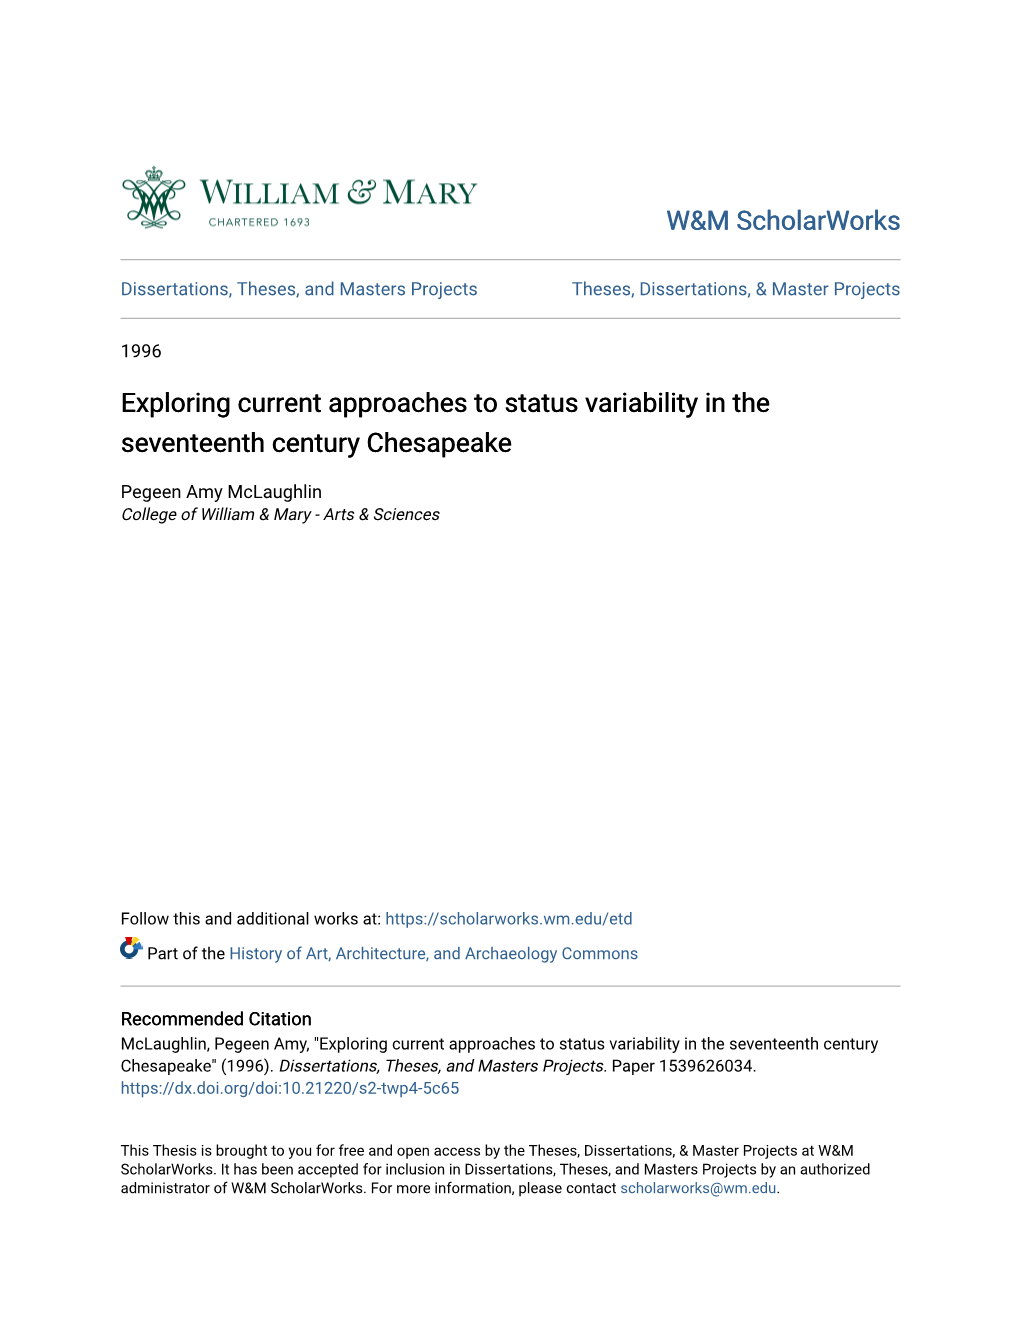 Exploring Current Approaches to Status Variability in the Seventeenth Century Chesapeake